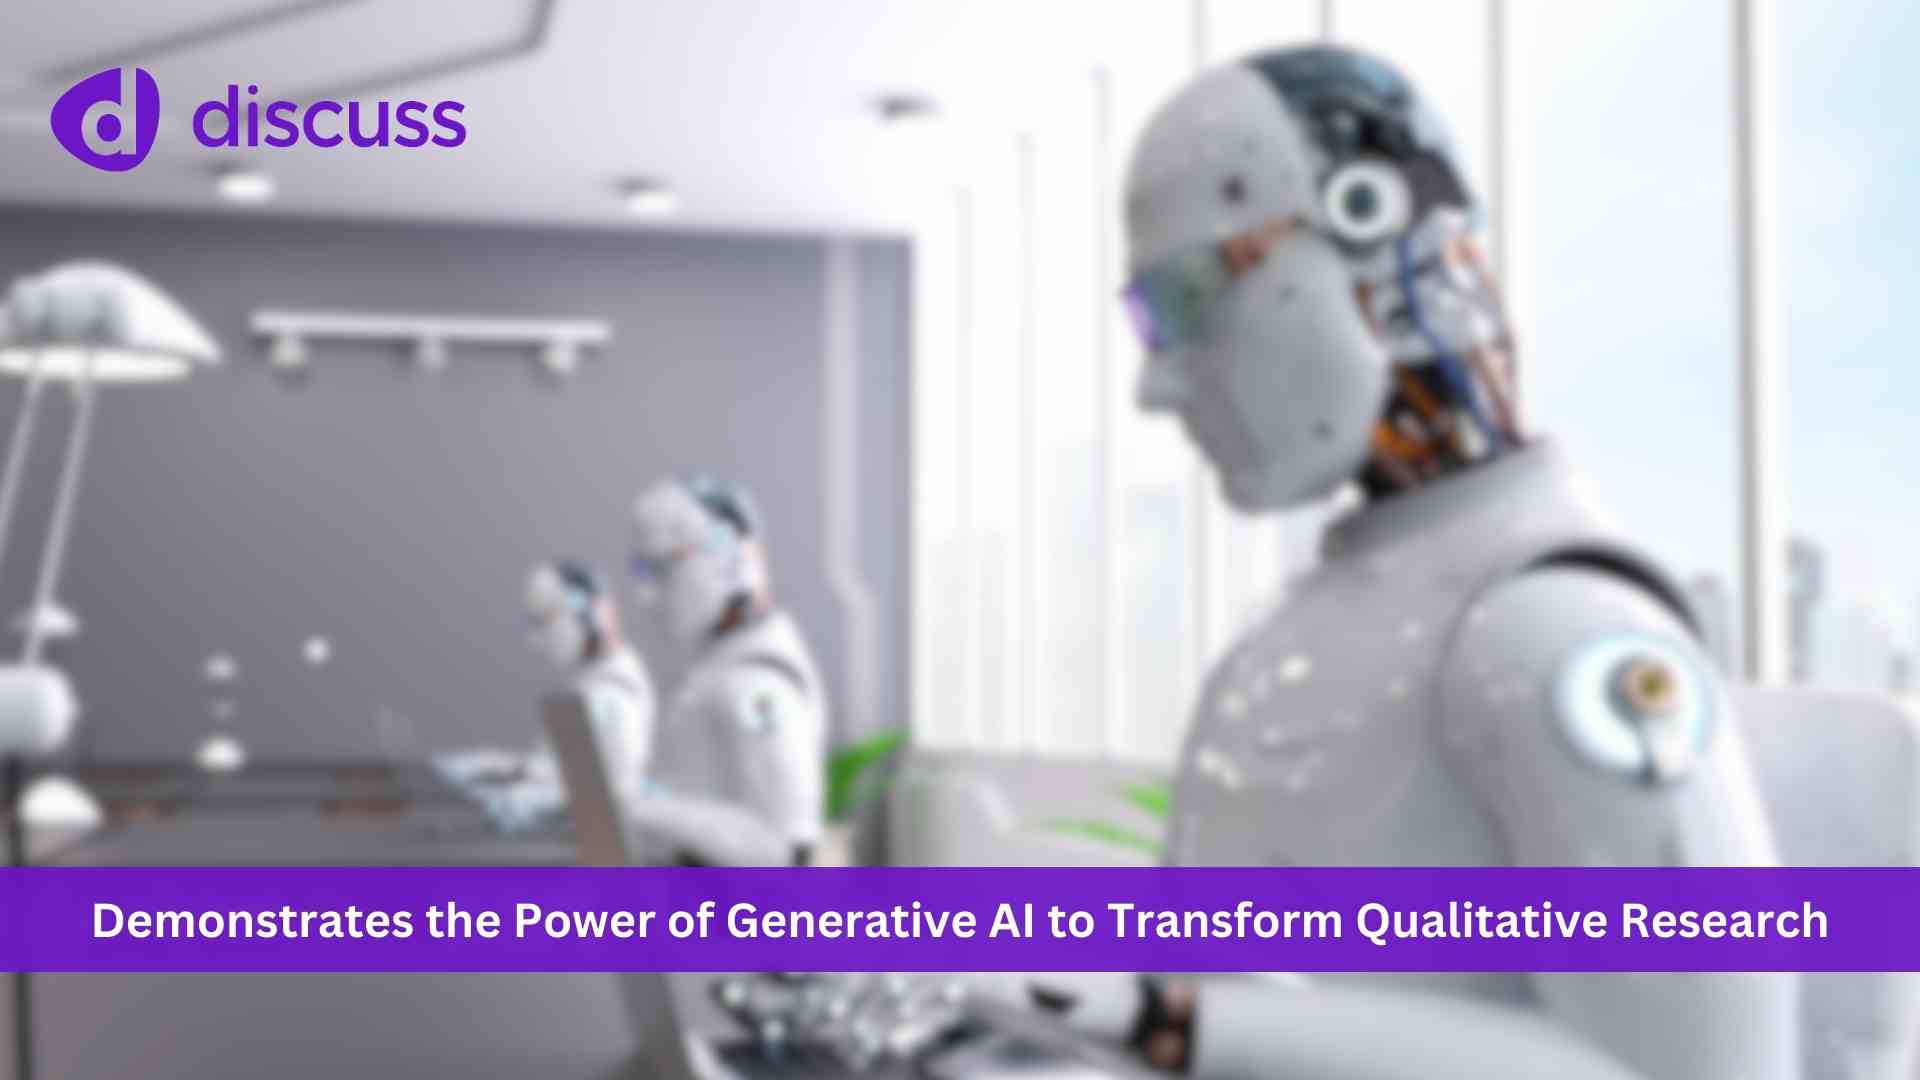 Discuss Demonstrates the Power of Generative AI to Transform Qualitative Research